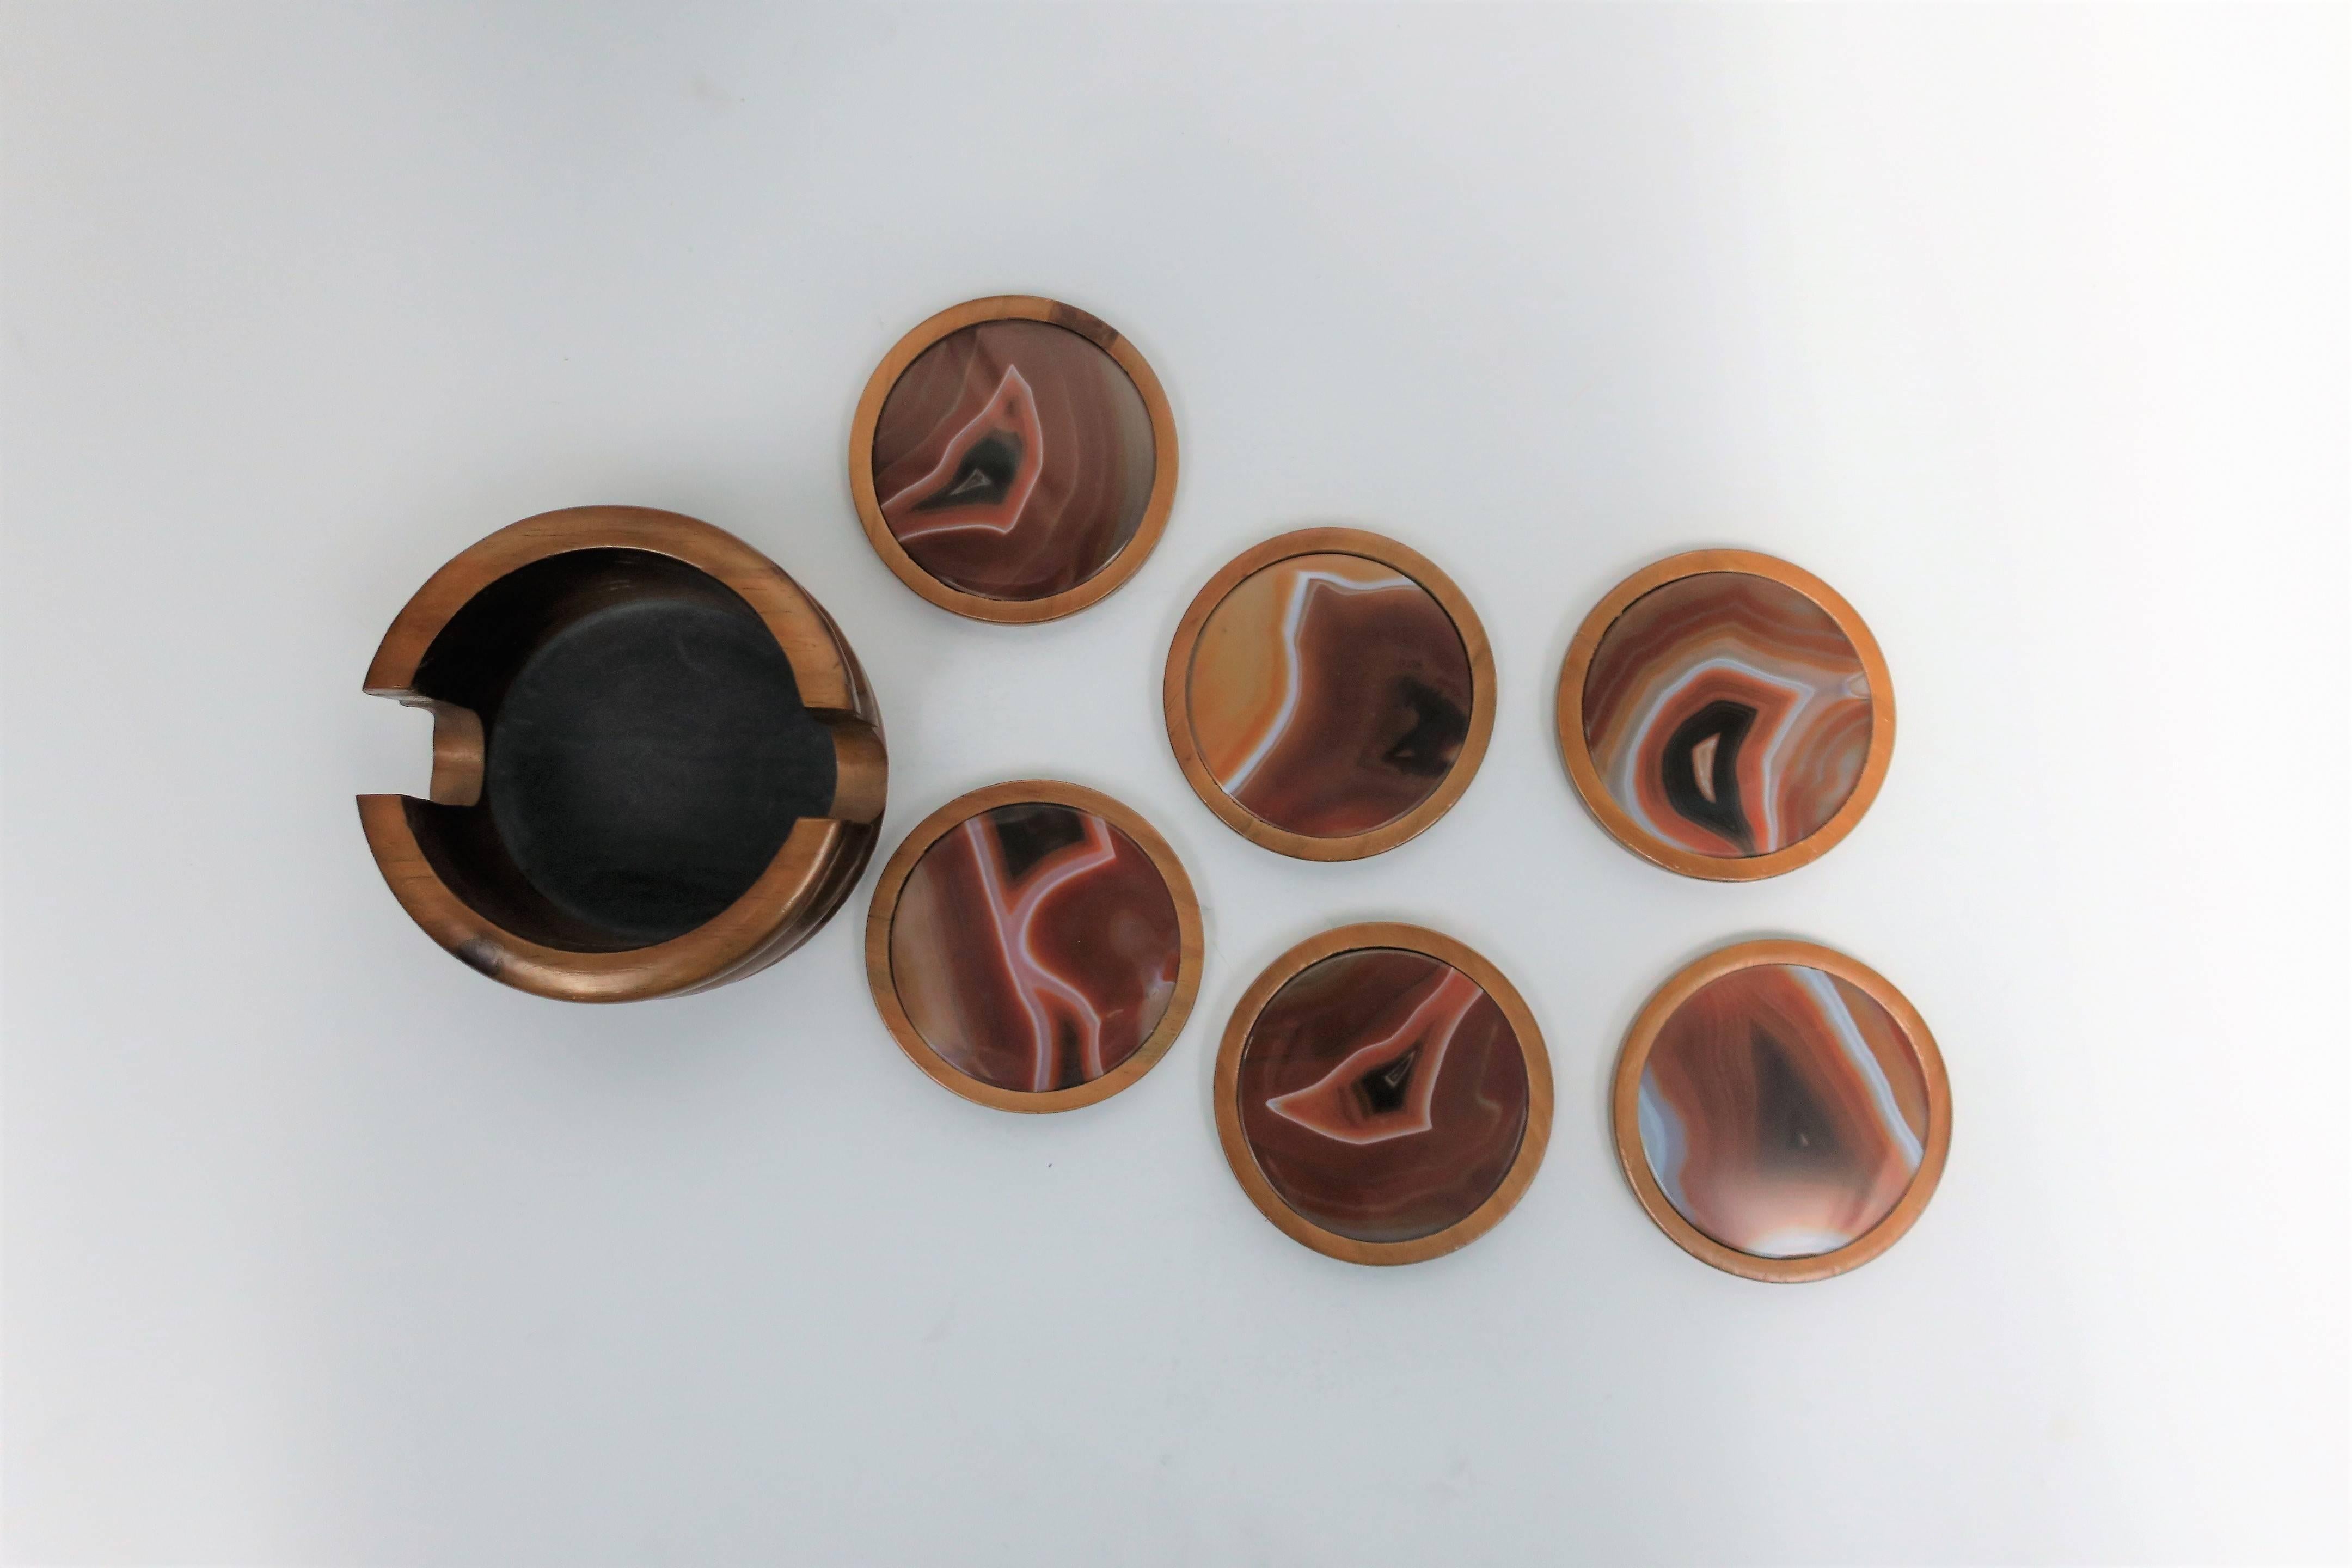 A beautiful vintage agate stone coaster set, circa 1970s. Set includes six round agate stone and wood coasters and one coaster vessel with fluted design. Seven pieces in total.

Set available here online. By request, set can be made available by